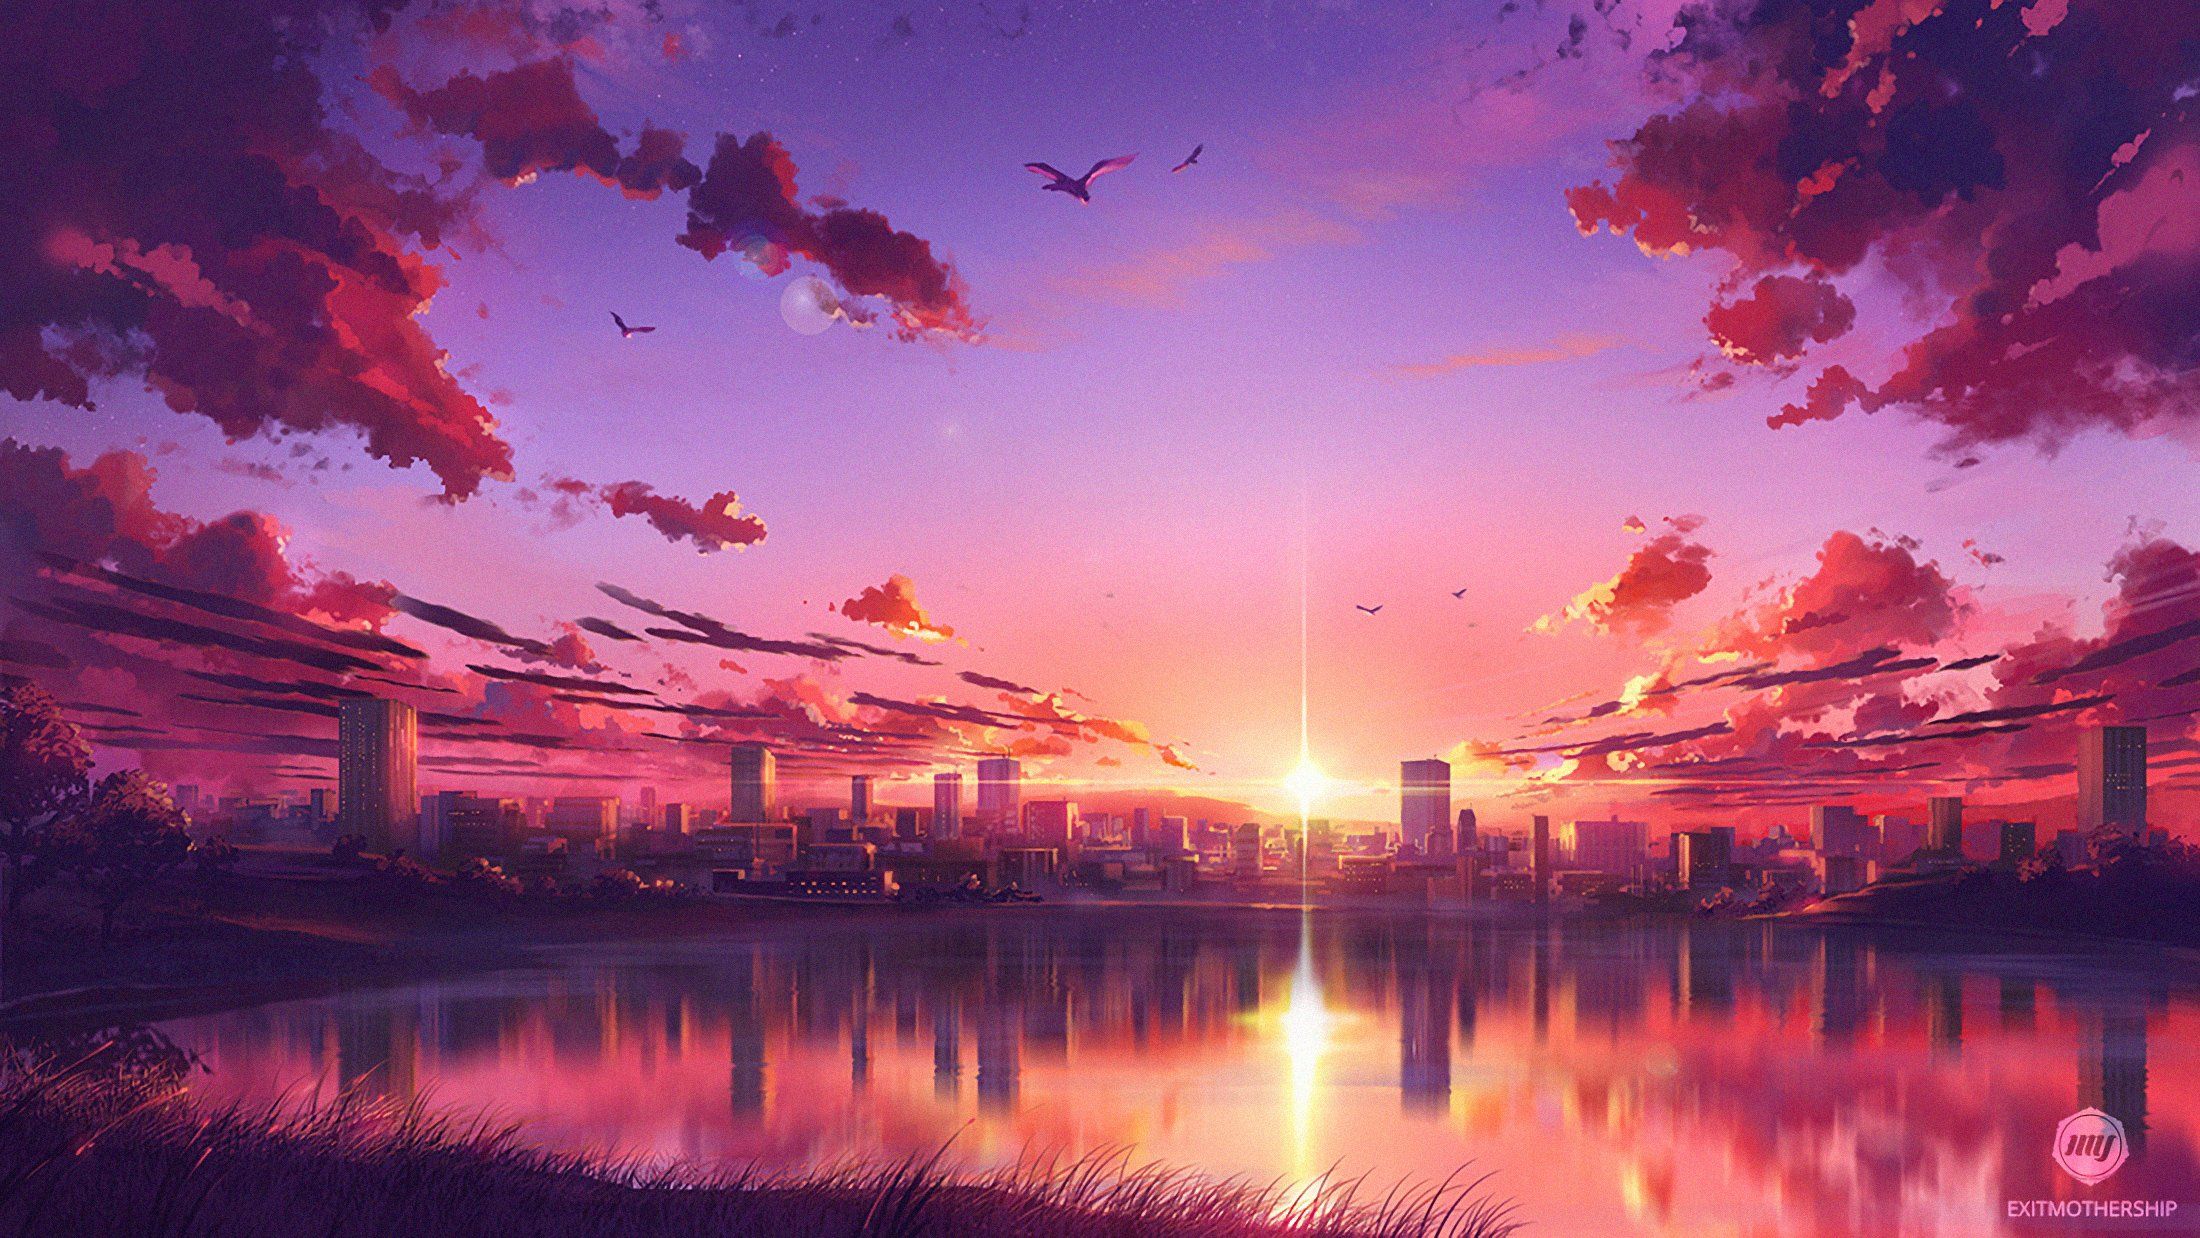 Sunset City Anime Wallpapers Wallpaper Cave